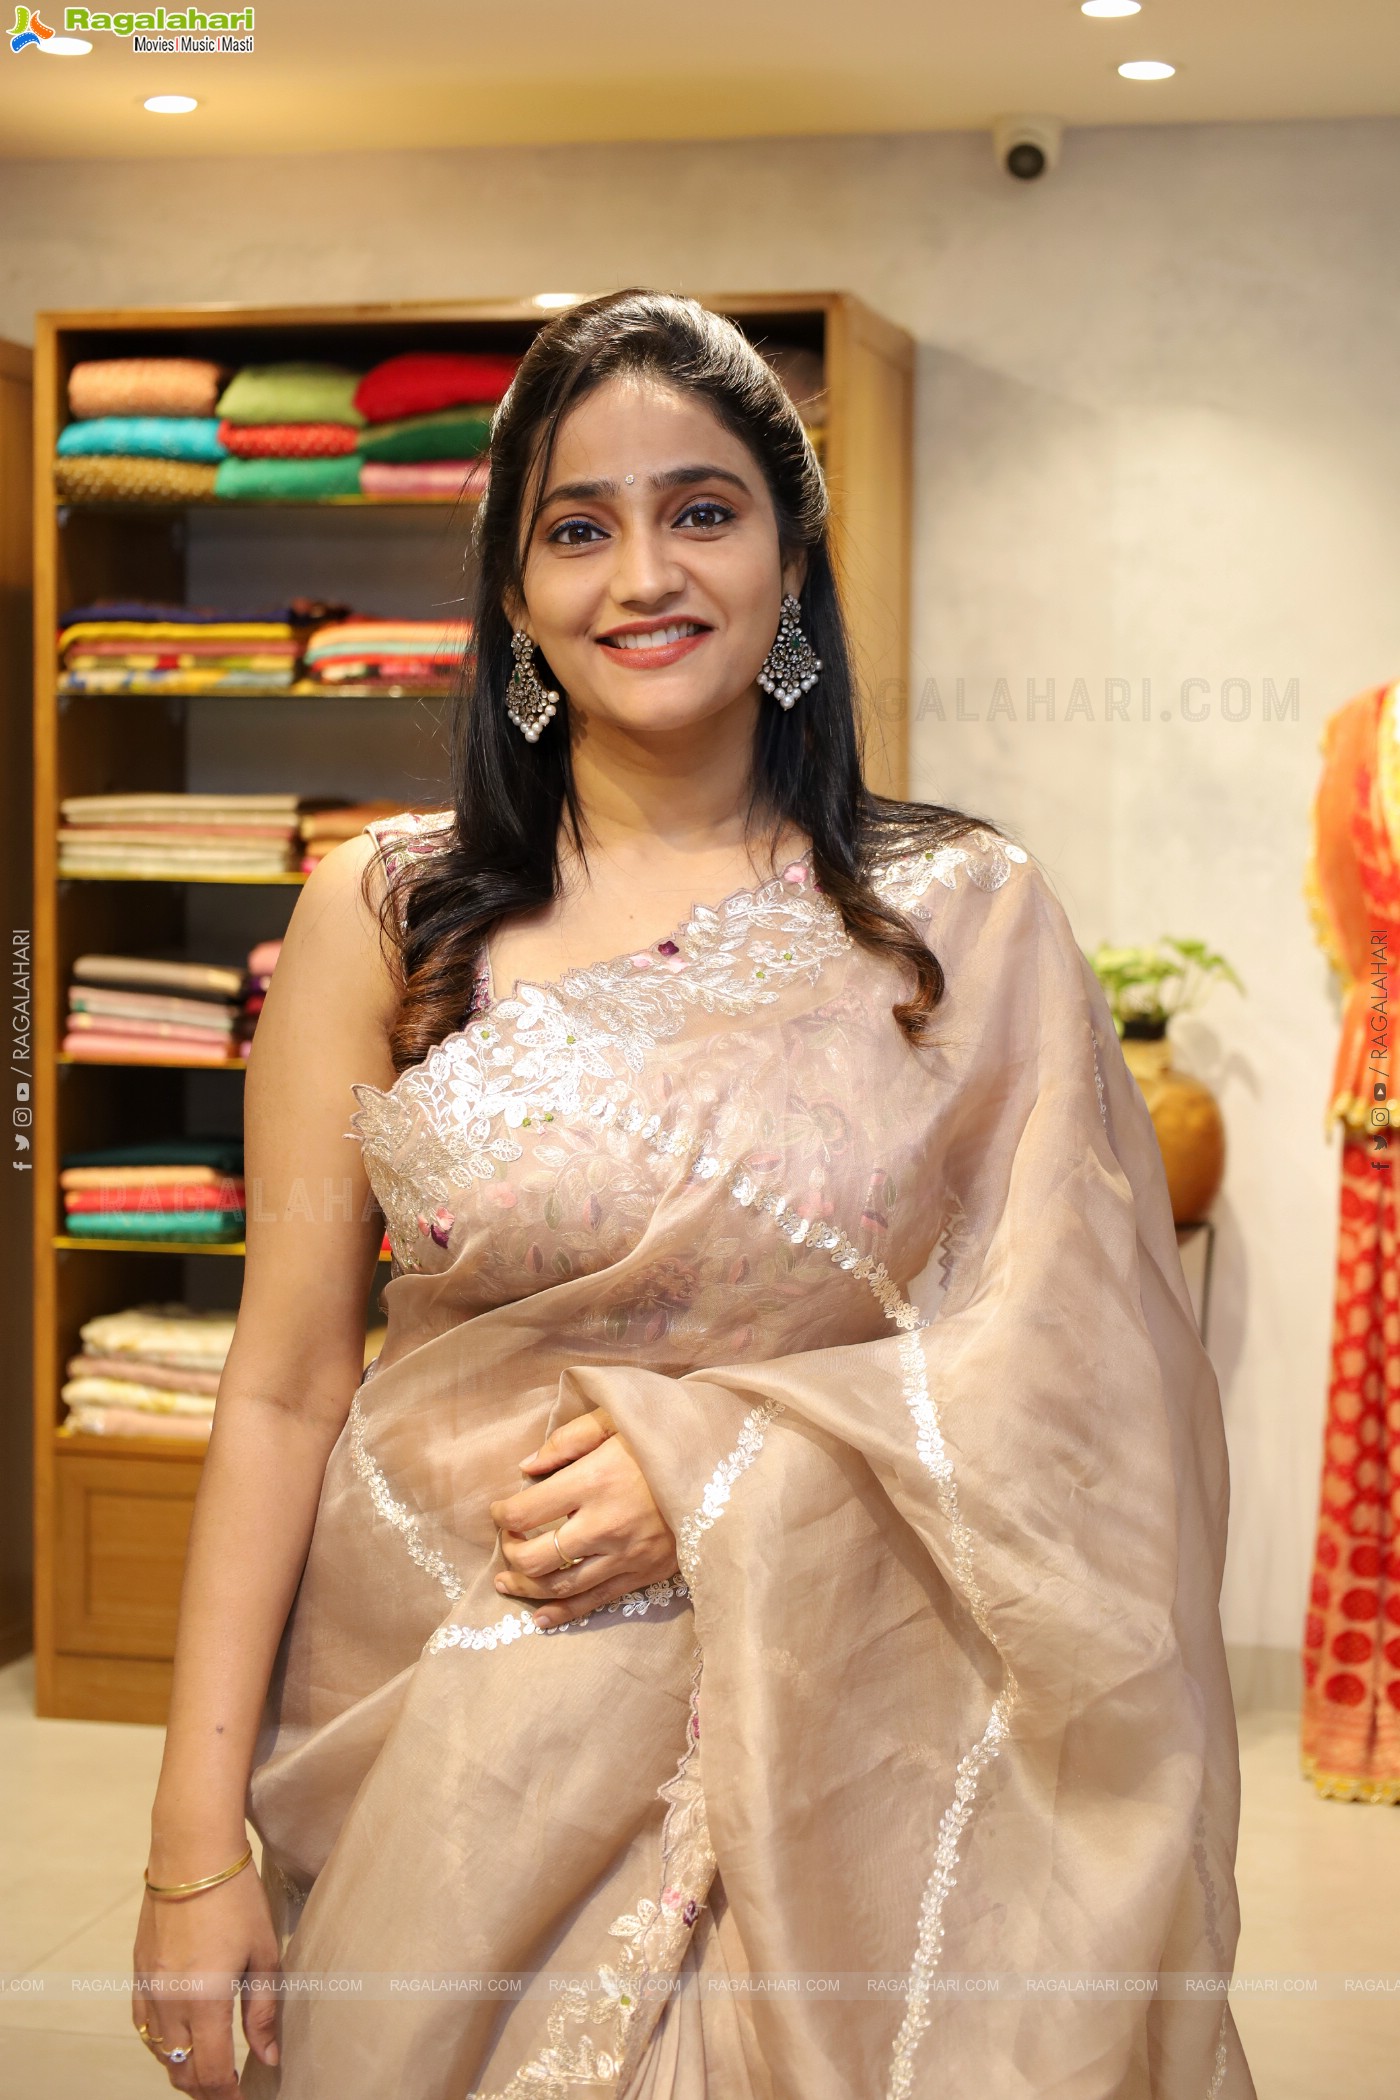 Anchor Suma Launch Manohari Festive collections, XiTI - Weaves of folklore 